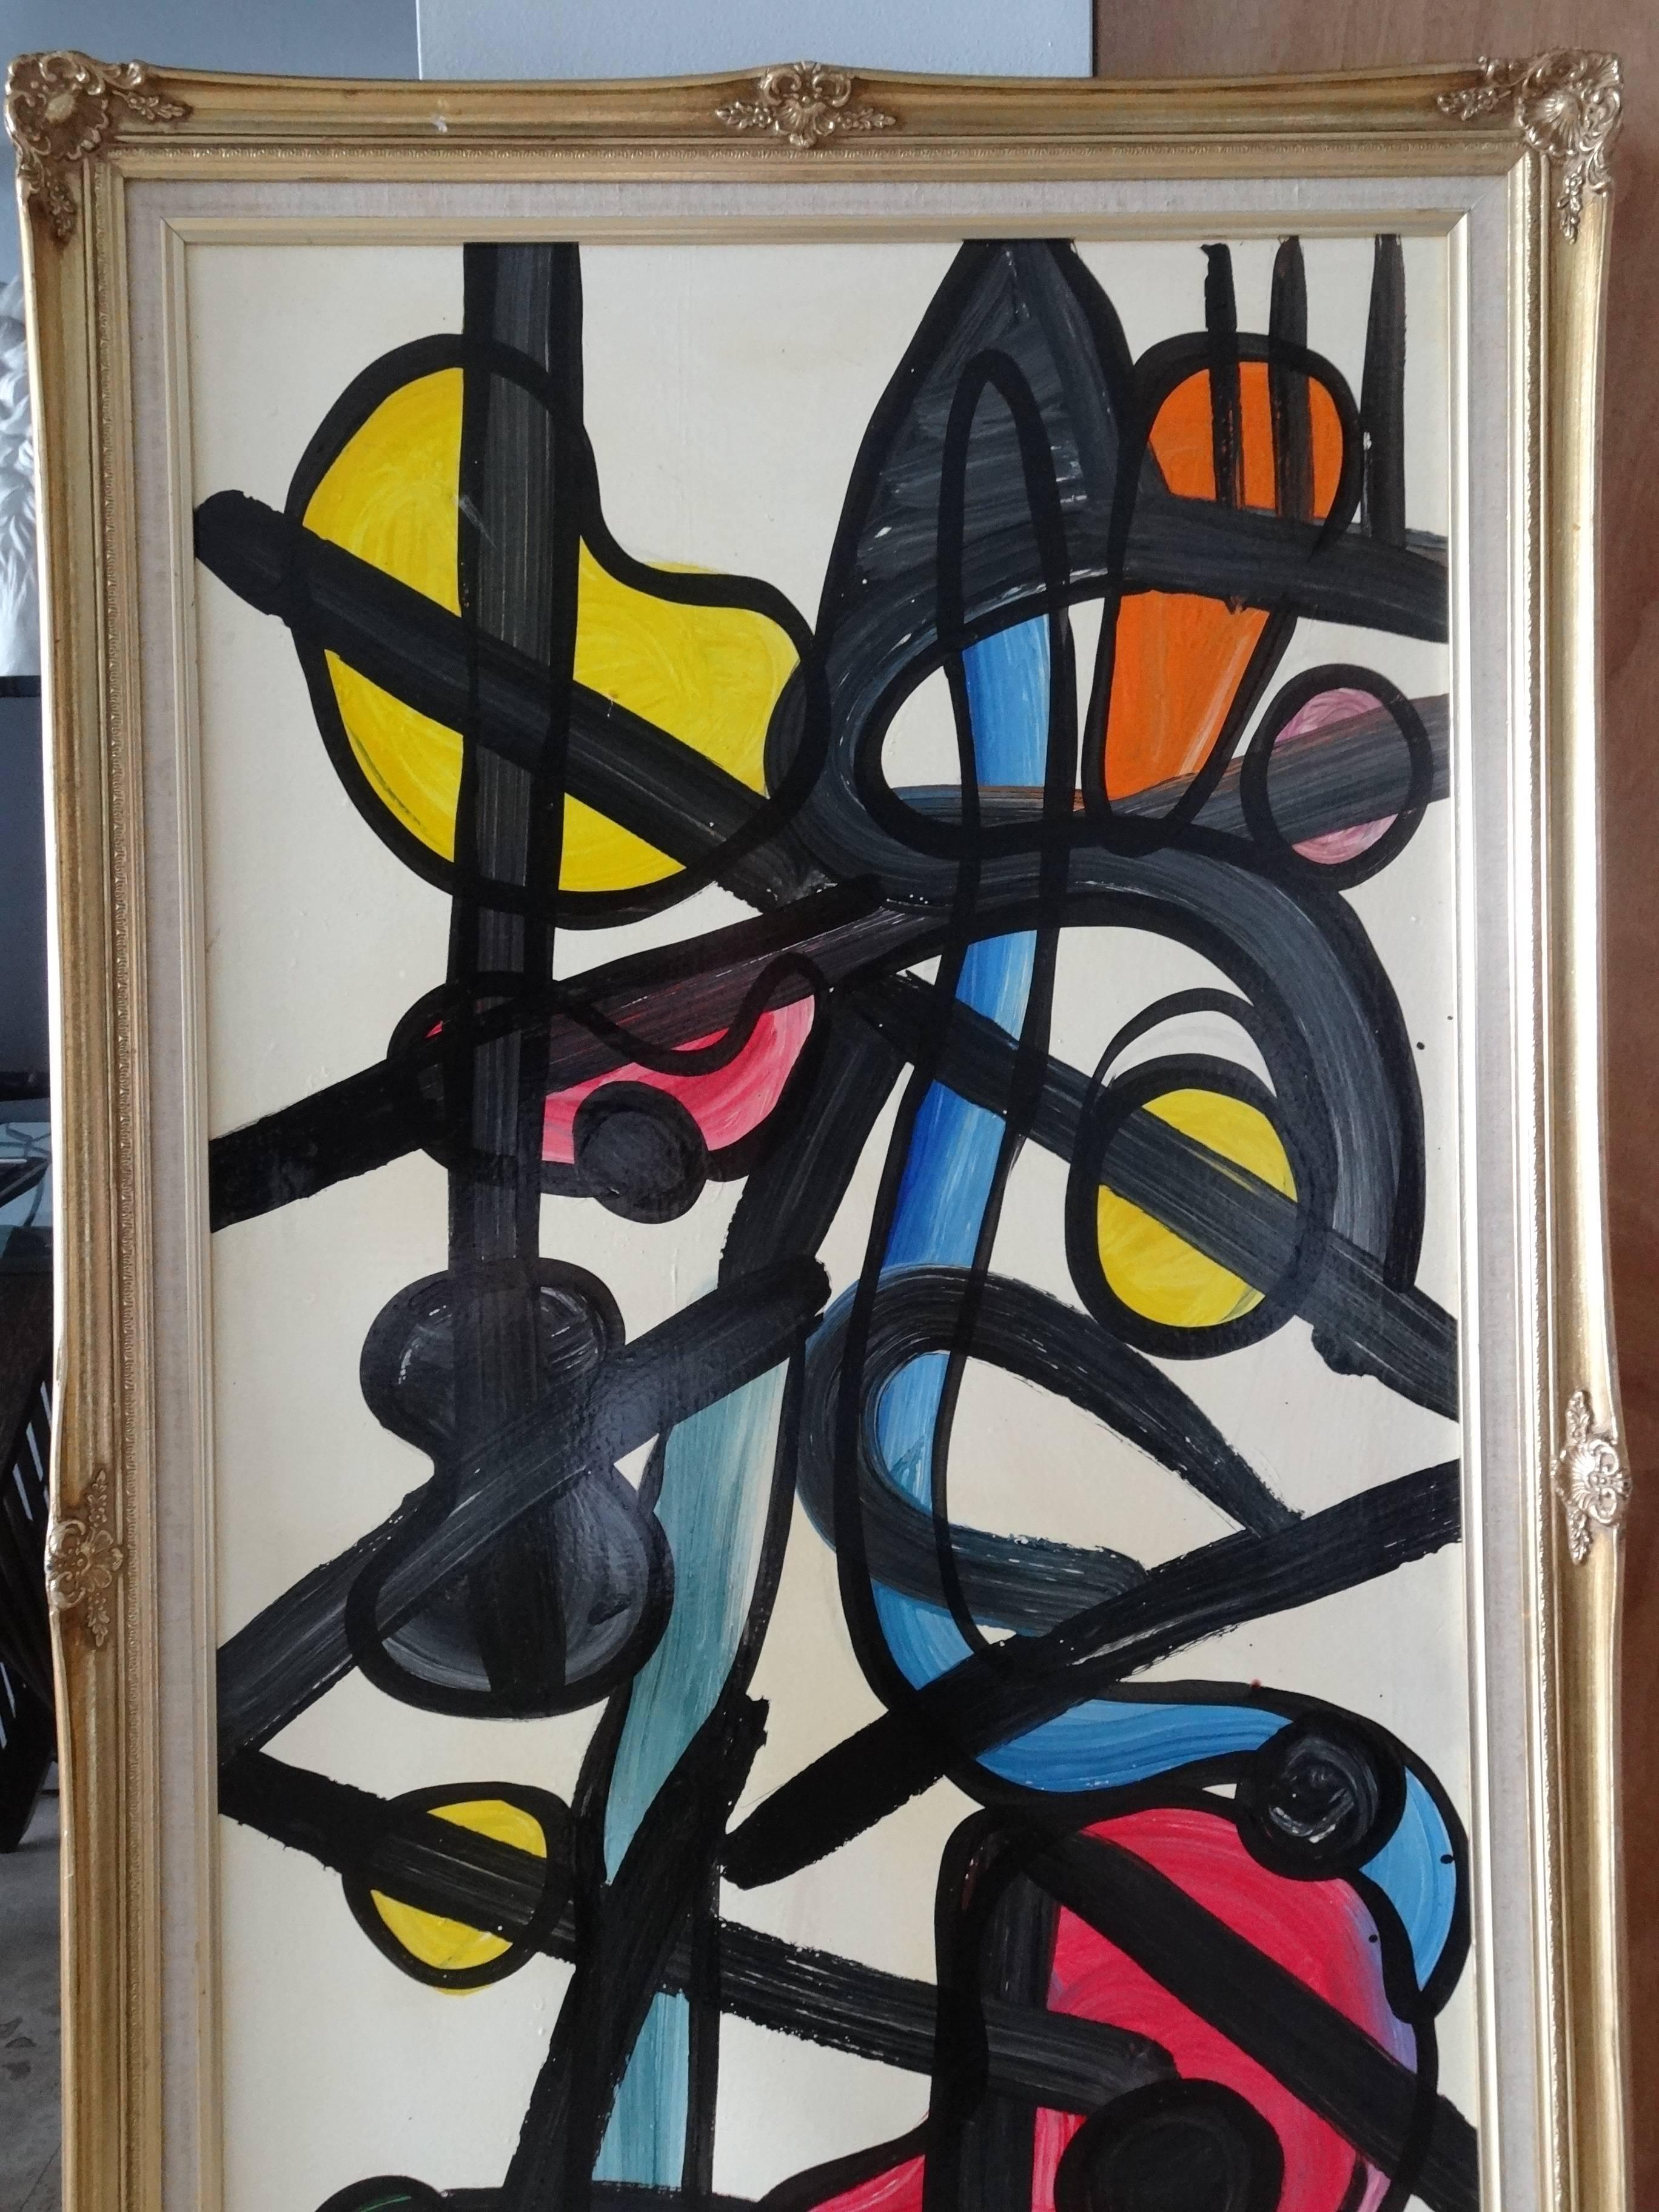 Acrylic and oil Miro like abstract painting on canvas by Peter Keil. Painted 1975 in Berlin, West Germany.